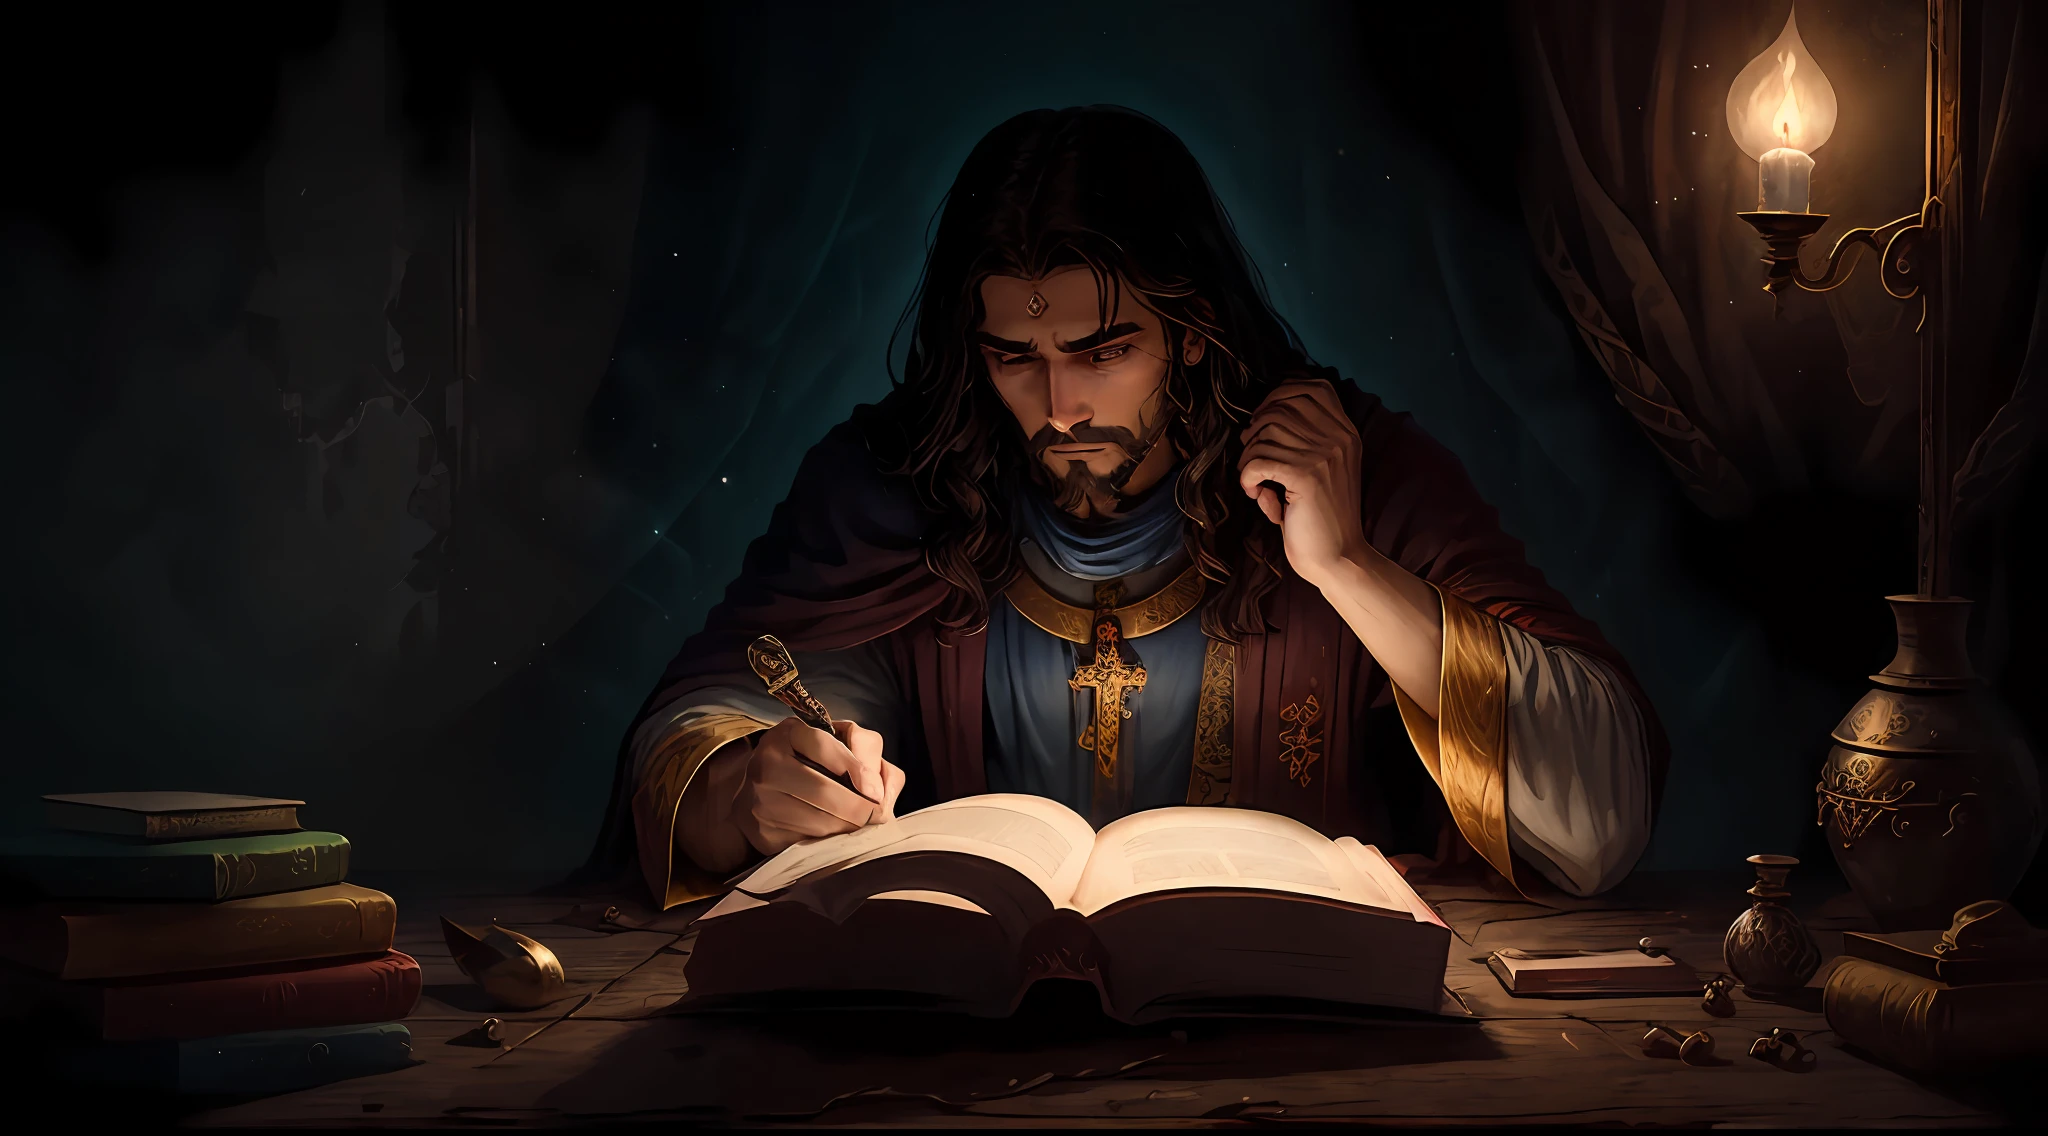 jesus reading a book with a cross in the background, king of kings, JesusChrist, the lord and savior, Young God Almighty, portrait of emperor of mankind, god emperor, holy sword in his hands, Retrato de JesusChrist, sat in his throne, bible illustration, the god emperor of mankind, avatar image, by Hristofor Žefarović -- auto